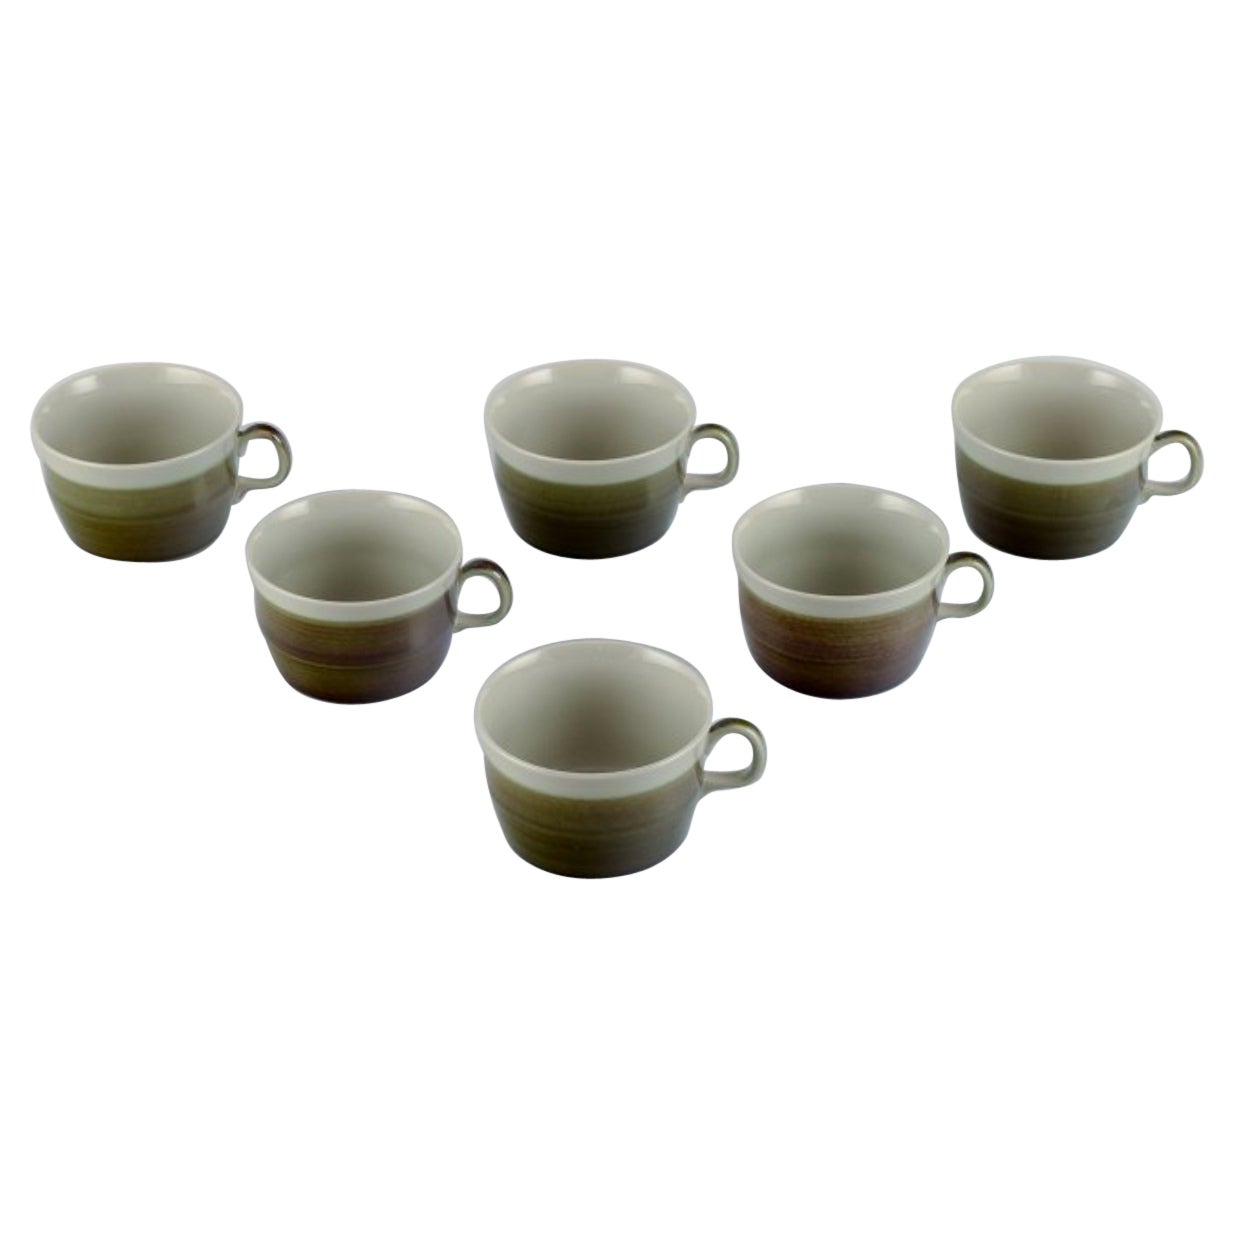 Marianne Westman for Rörstrand. "Maya", set of six coffee cups in stoneware For Sale